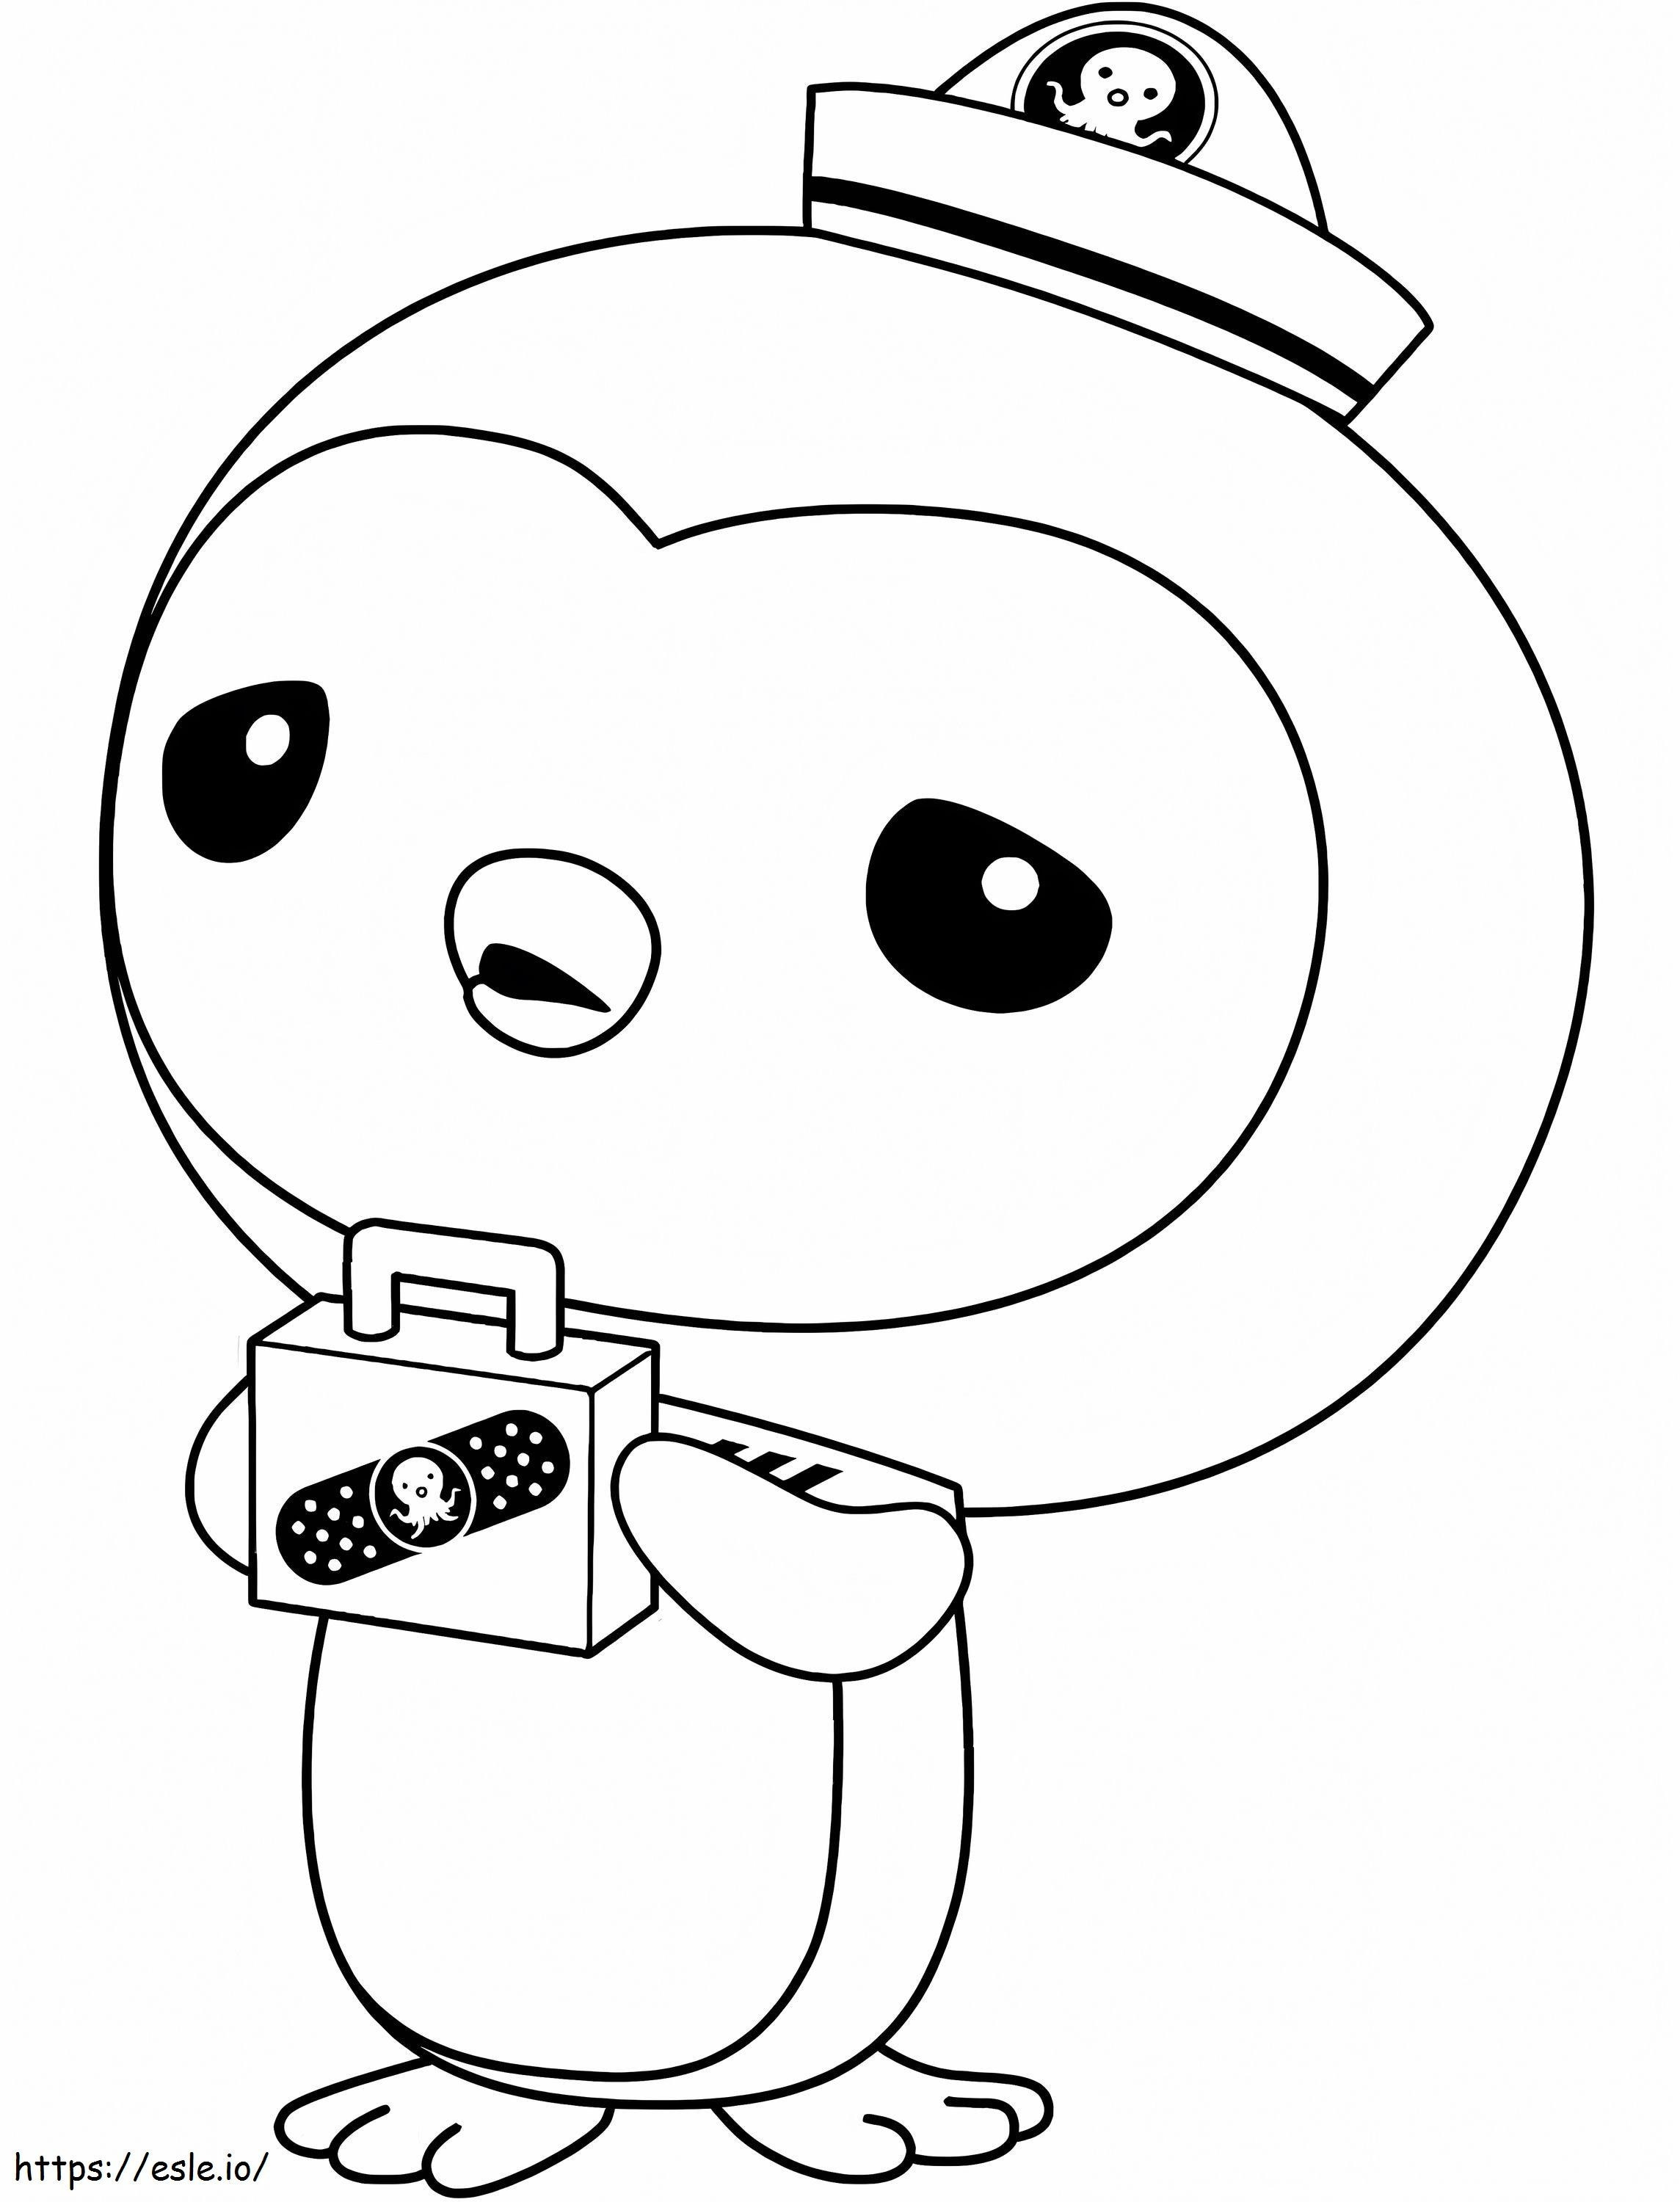 Weight So Cute coloring page